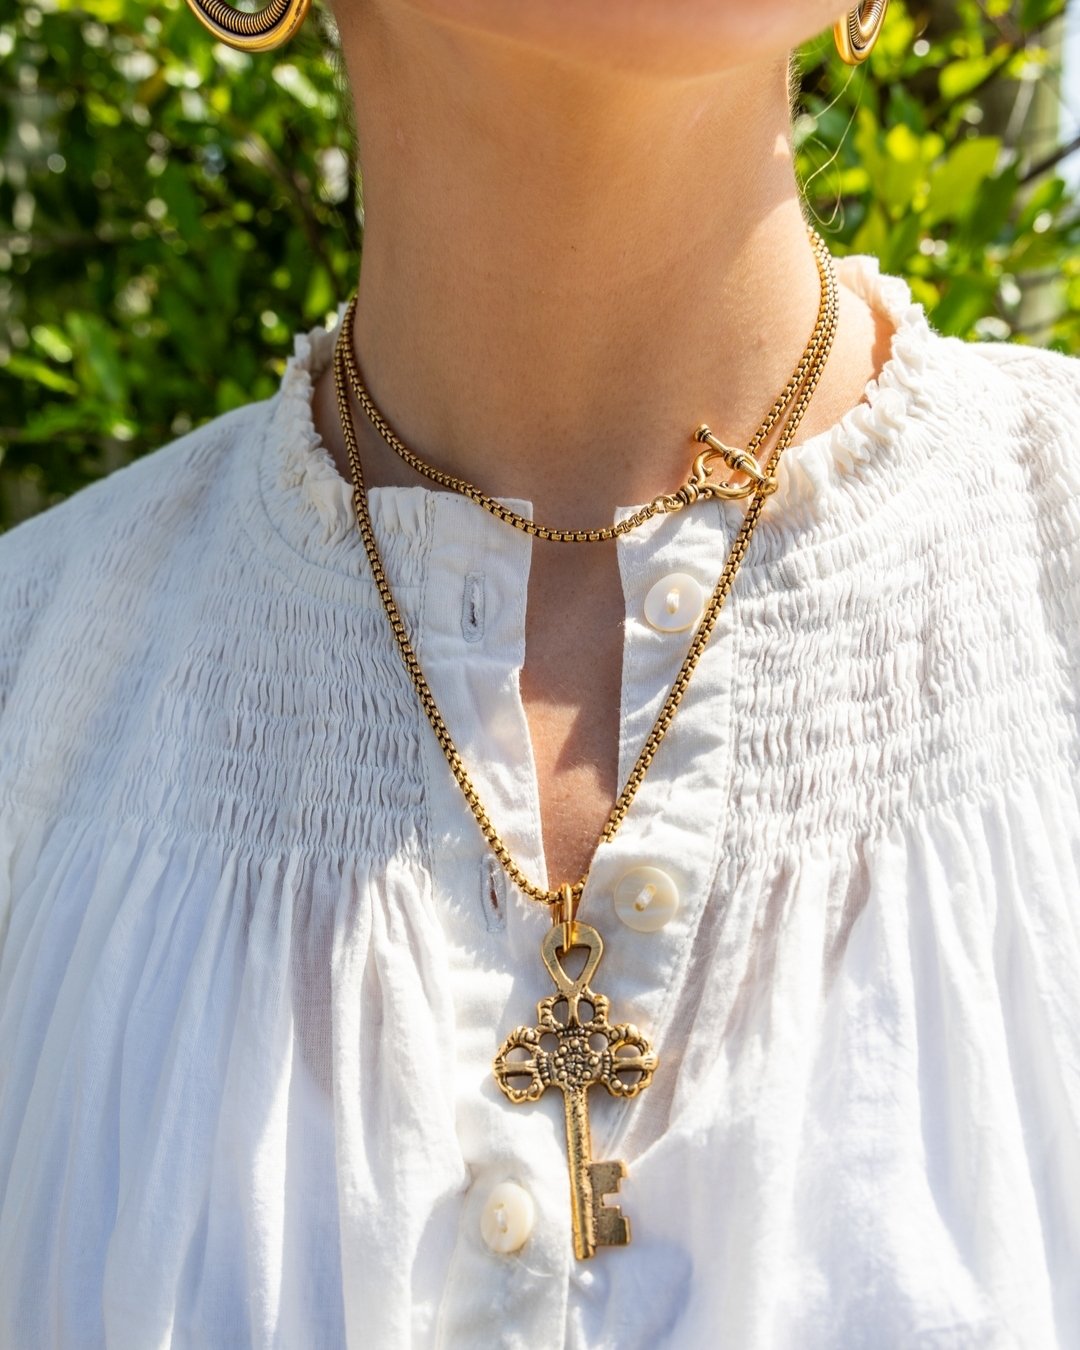 Introducing our NEW Tibetan Key! 
Our love for old keys knows no end. Cast from the original antique Tibetan key I discovered, this pendant is sold separately or on this 33&quot; vintage chain necklace. All gold plated in the USA, so it is lead-free,